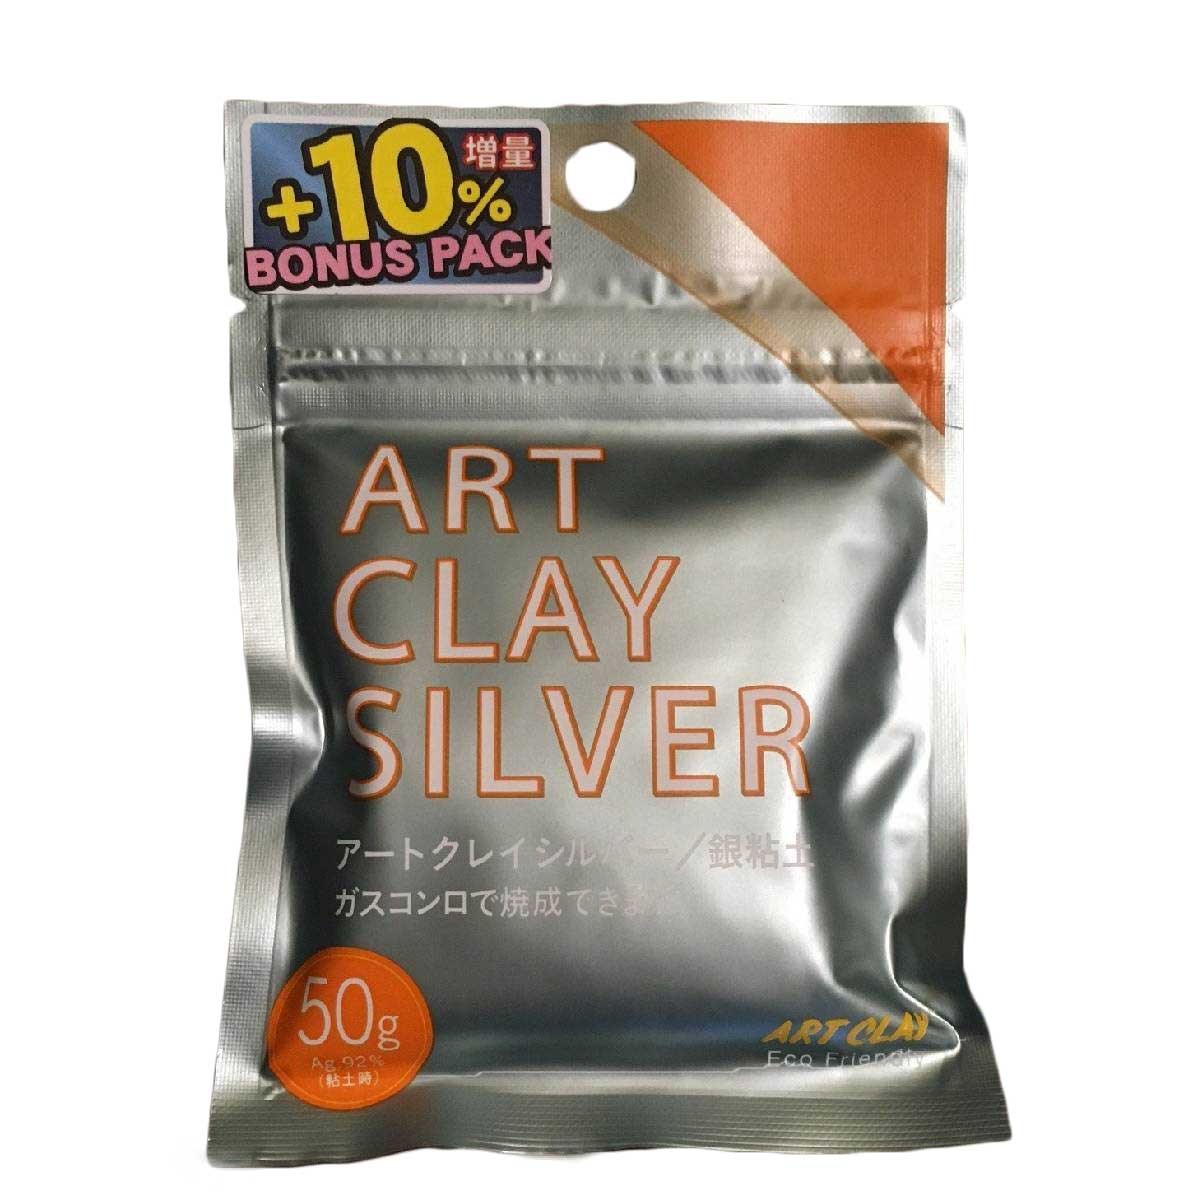 Art Clay Silver - Art Clay Silver added a new photo.